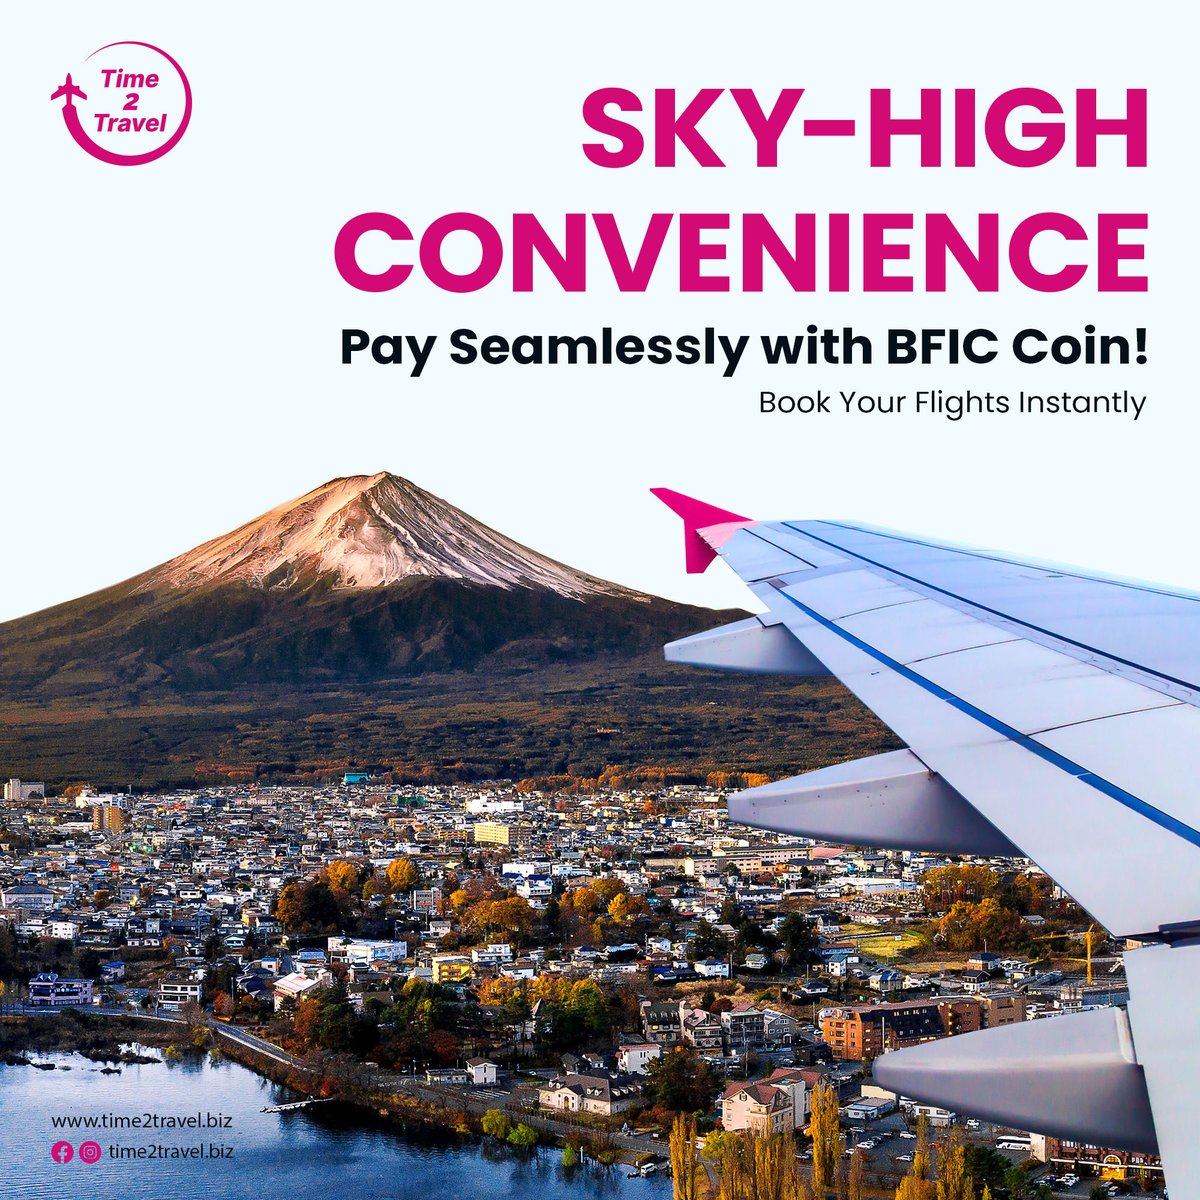 Your #journey is just a click away—book now and experience the sky-high #convenience of Time2Travel. 

#Time2Travel #BFICoin #EffortlessBookings #Travel #BookNow #Flights #Discounts #Savings #bookyourflight #EasyPayment